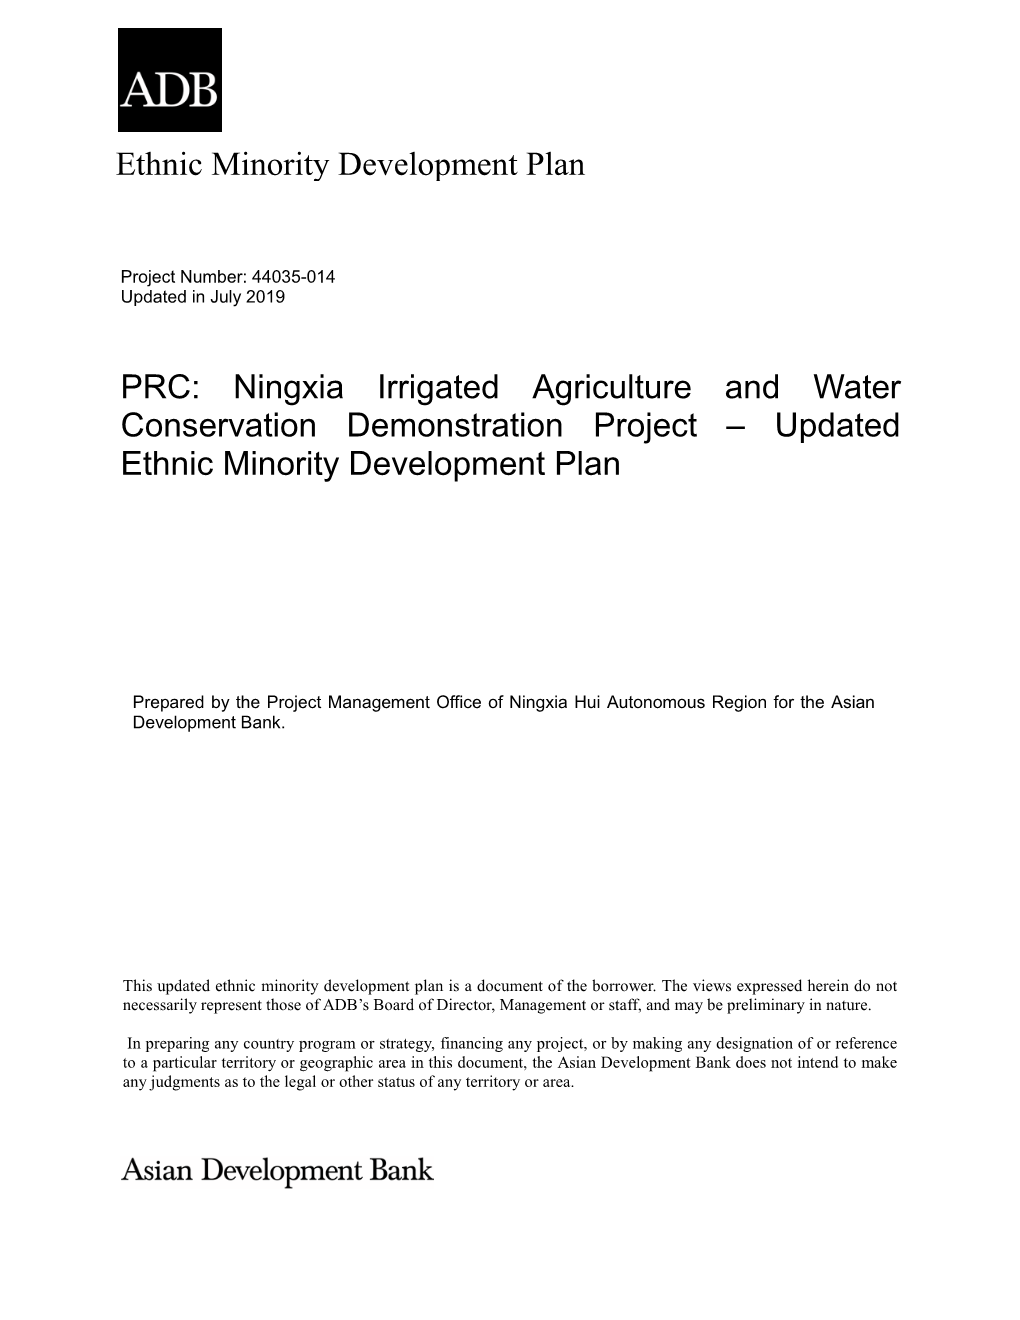 44035-014: Ningxia Irrigated Agriculture and Water Conservation